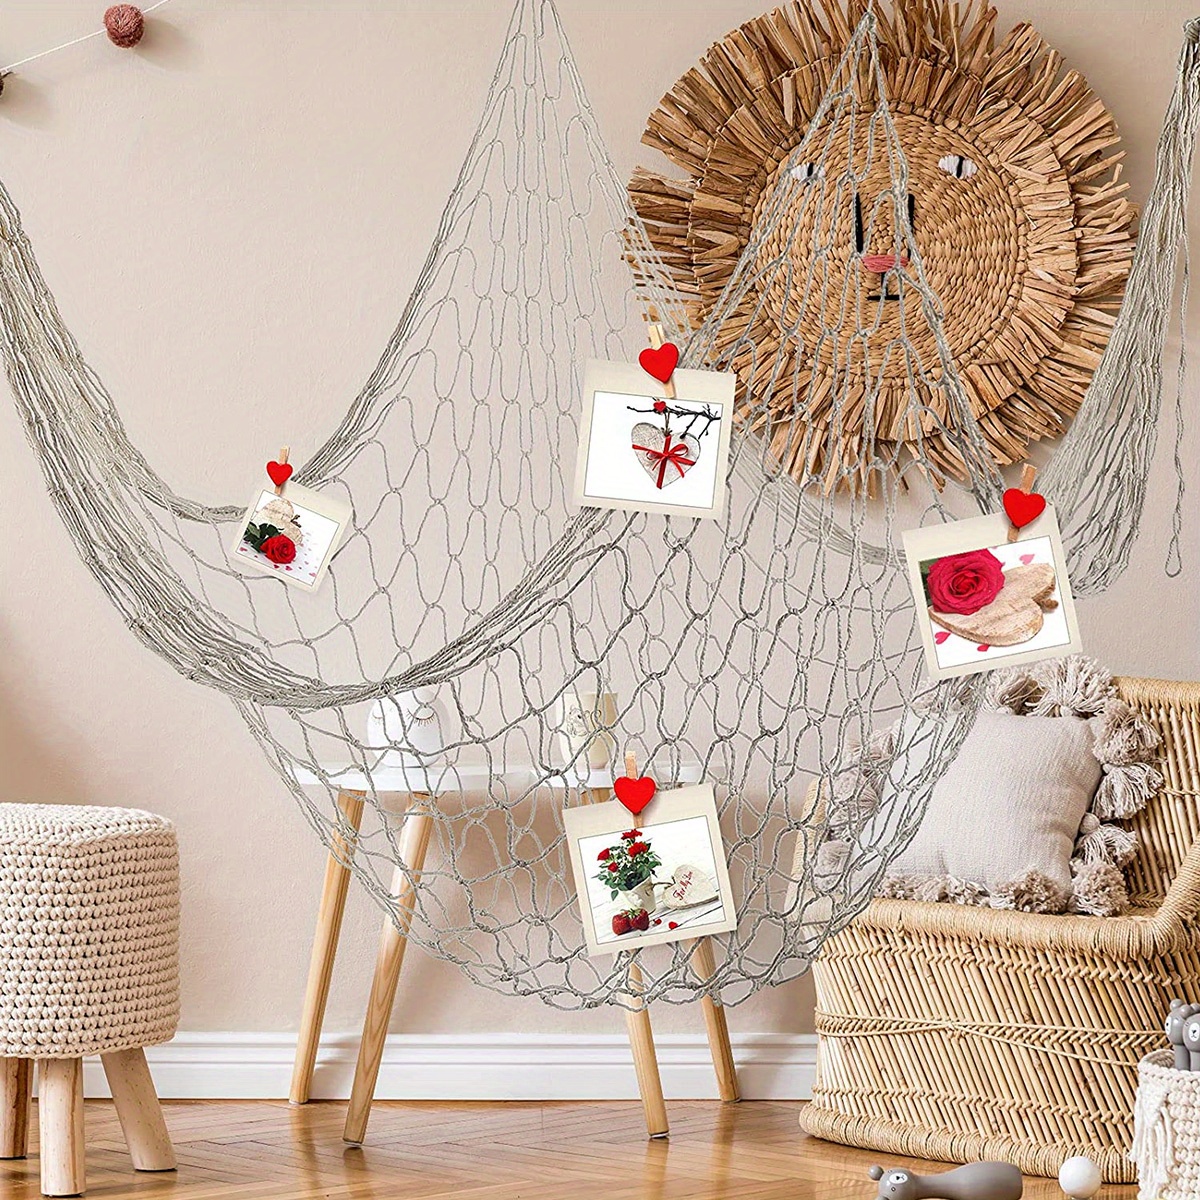 Wall Hanging Fish Net Decorative With 9 Sea Shells Home Party Nautical  Beach DIY